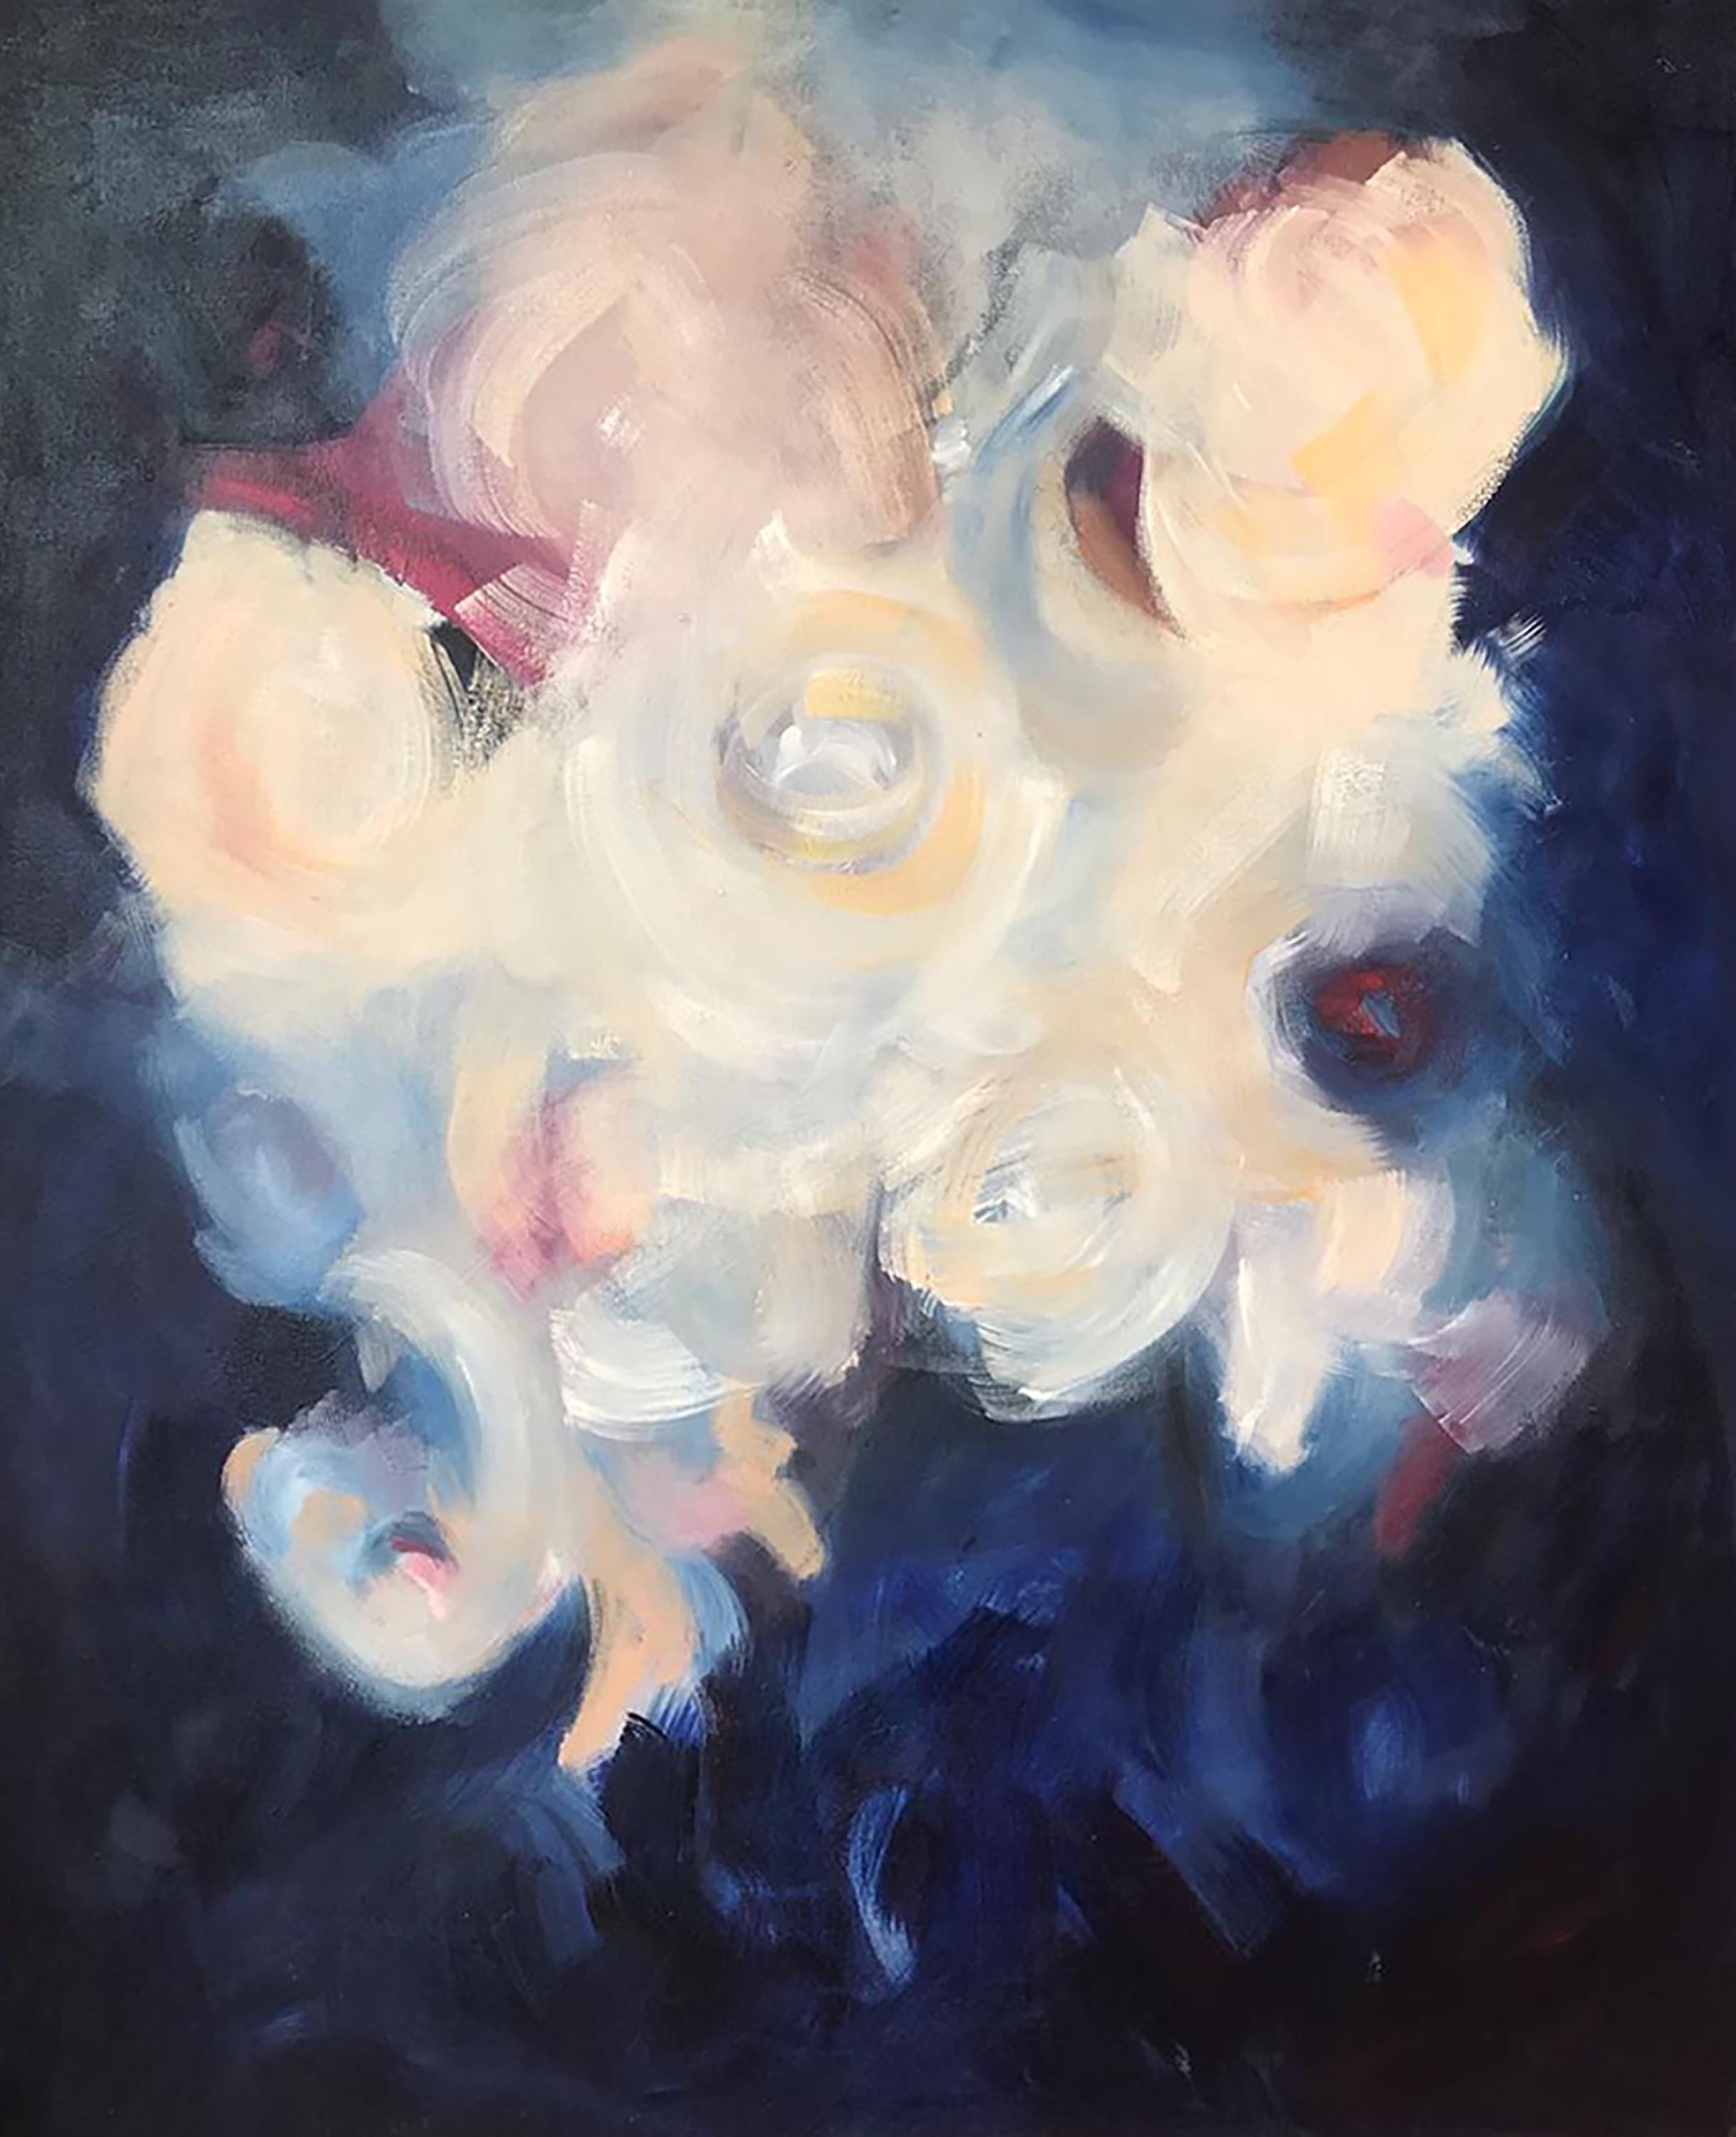 Dualidad
Oil On Canvas
43 x 37

My work is mainly abstract, I would say abstract expressionism. I love painting with oils, they give me many possibilities I do not find in other mediums. When working with collages on paper or wood I use acrylics,